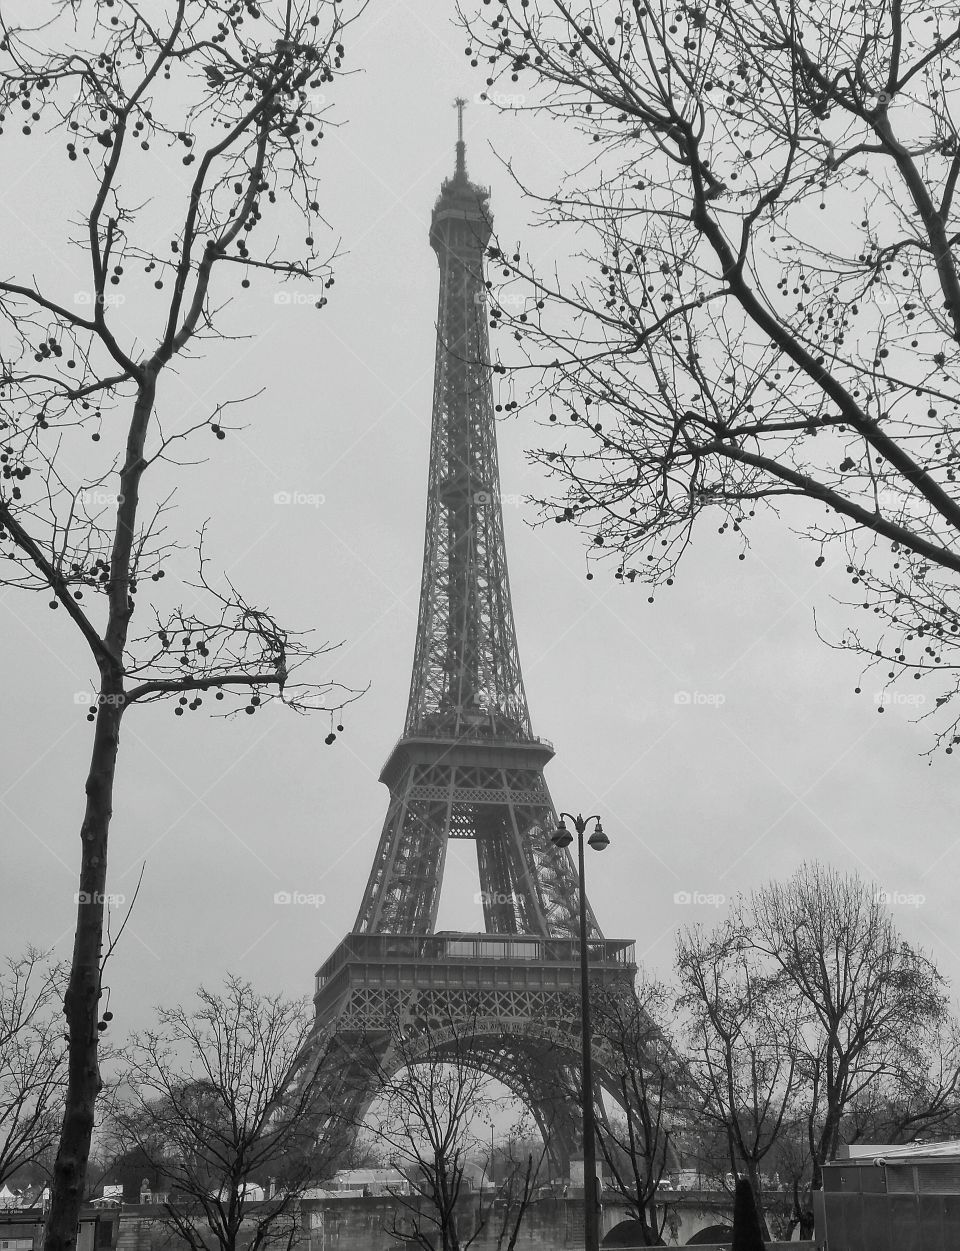 The Eiffel Tower. The Eiffel Tower on a cloudy, rainy day in Paris. 